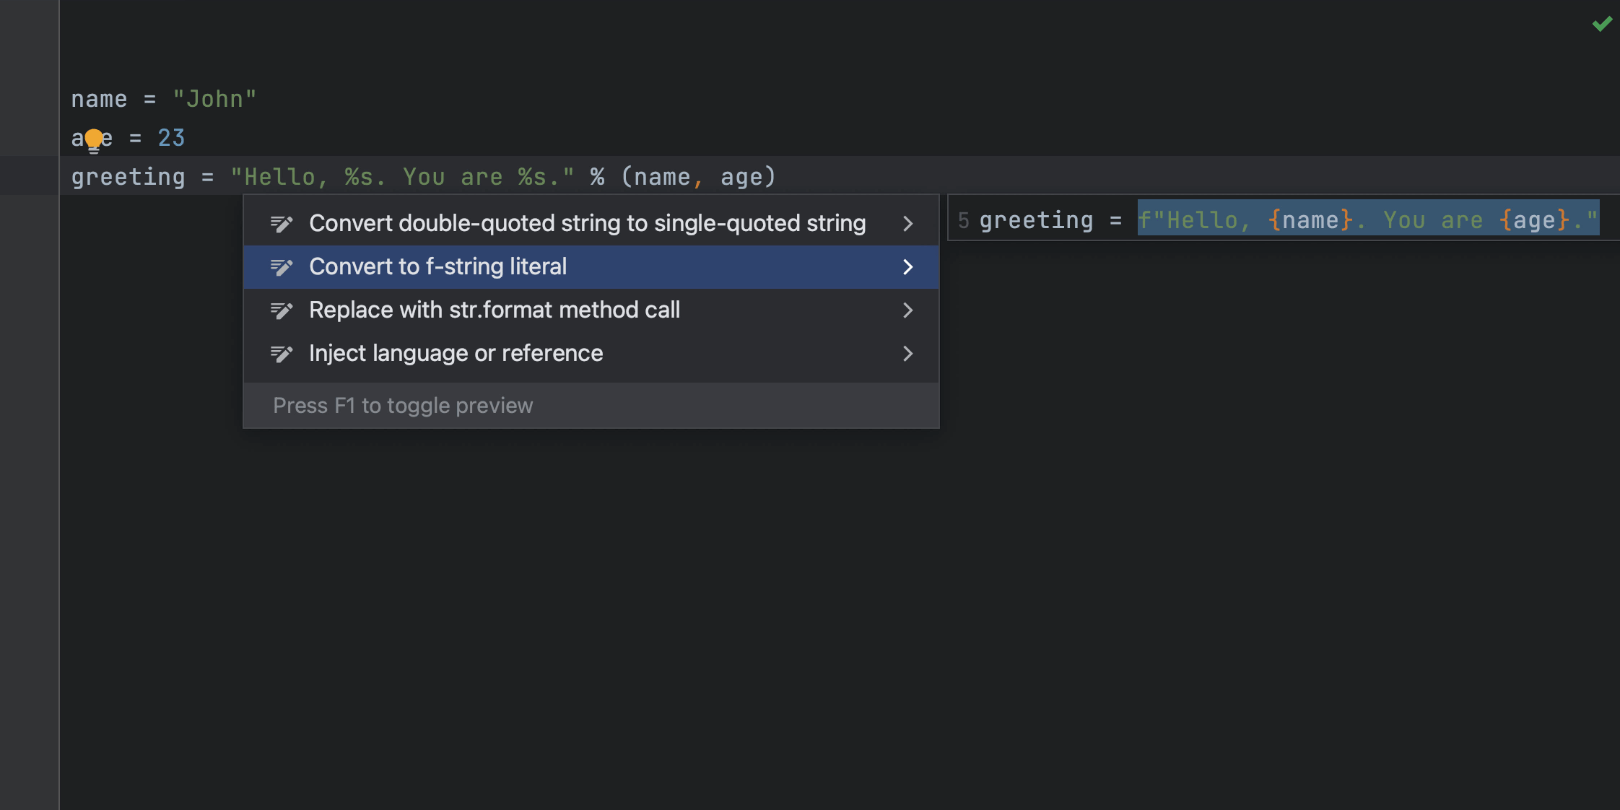 https://www.jetbrains.com/pycharm/whatsnew/img/2022.3/09_Editor_intention_action.png